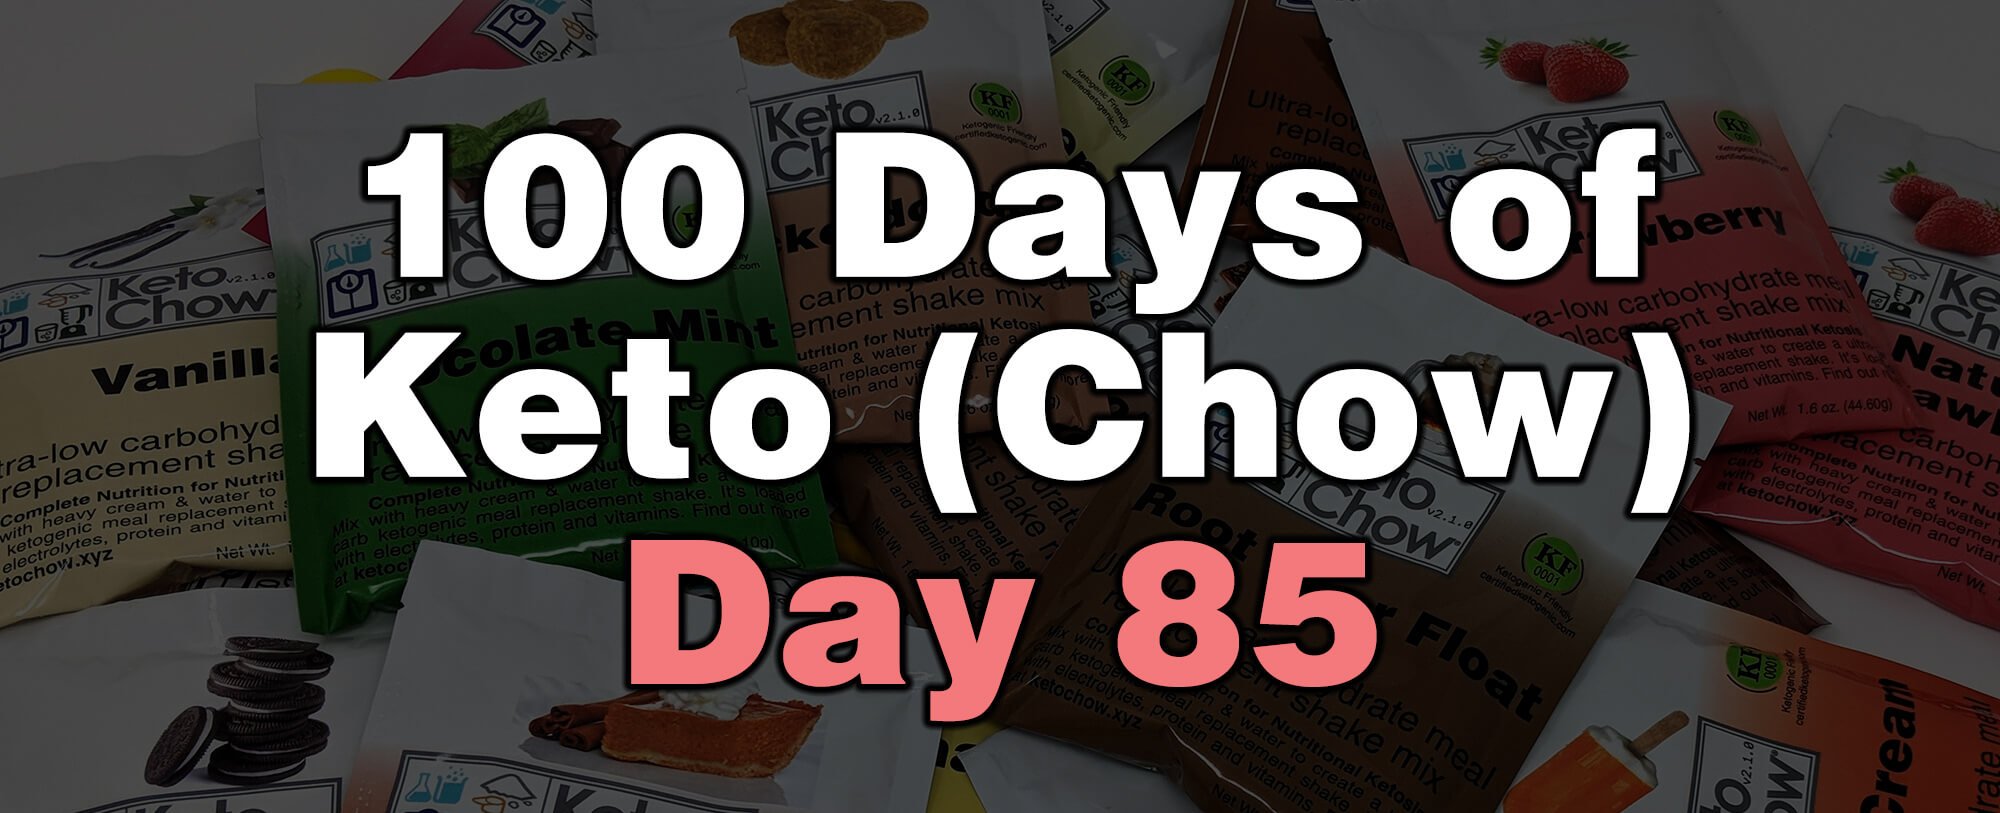 100 days of keto chow day 85